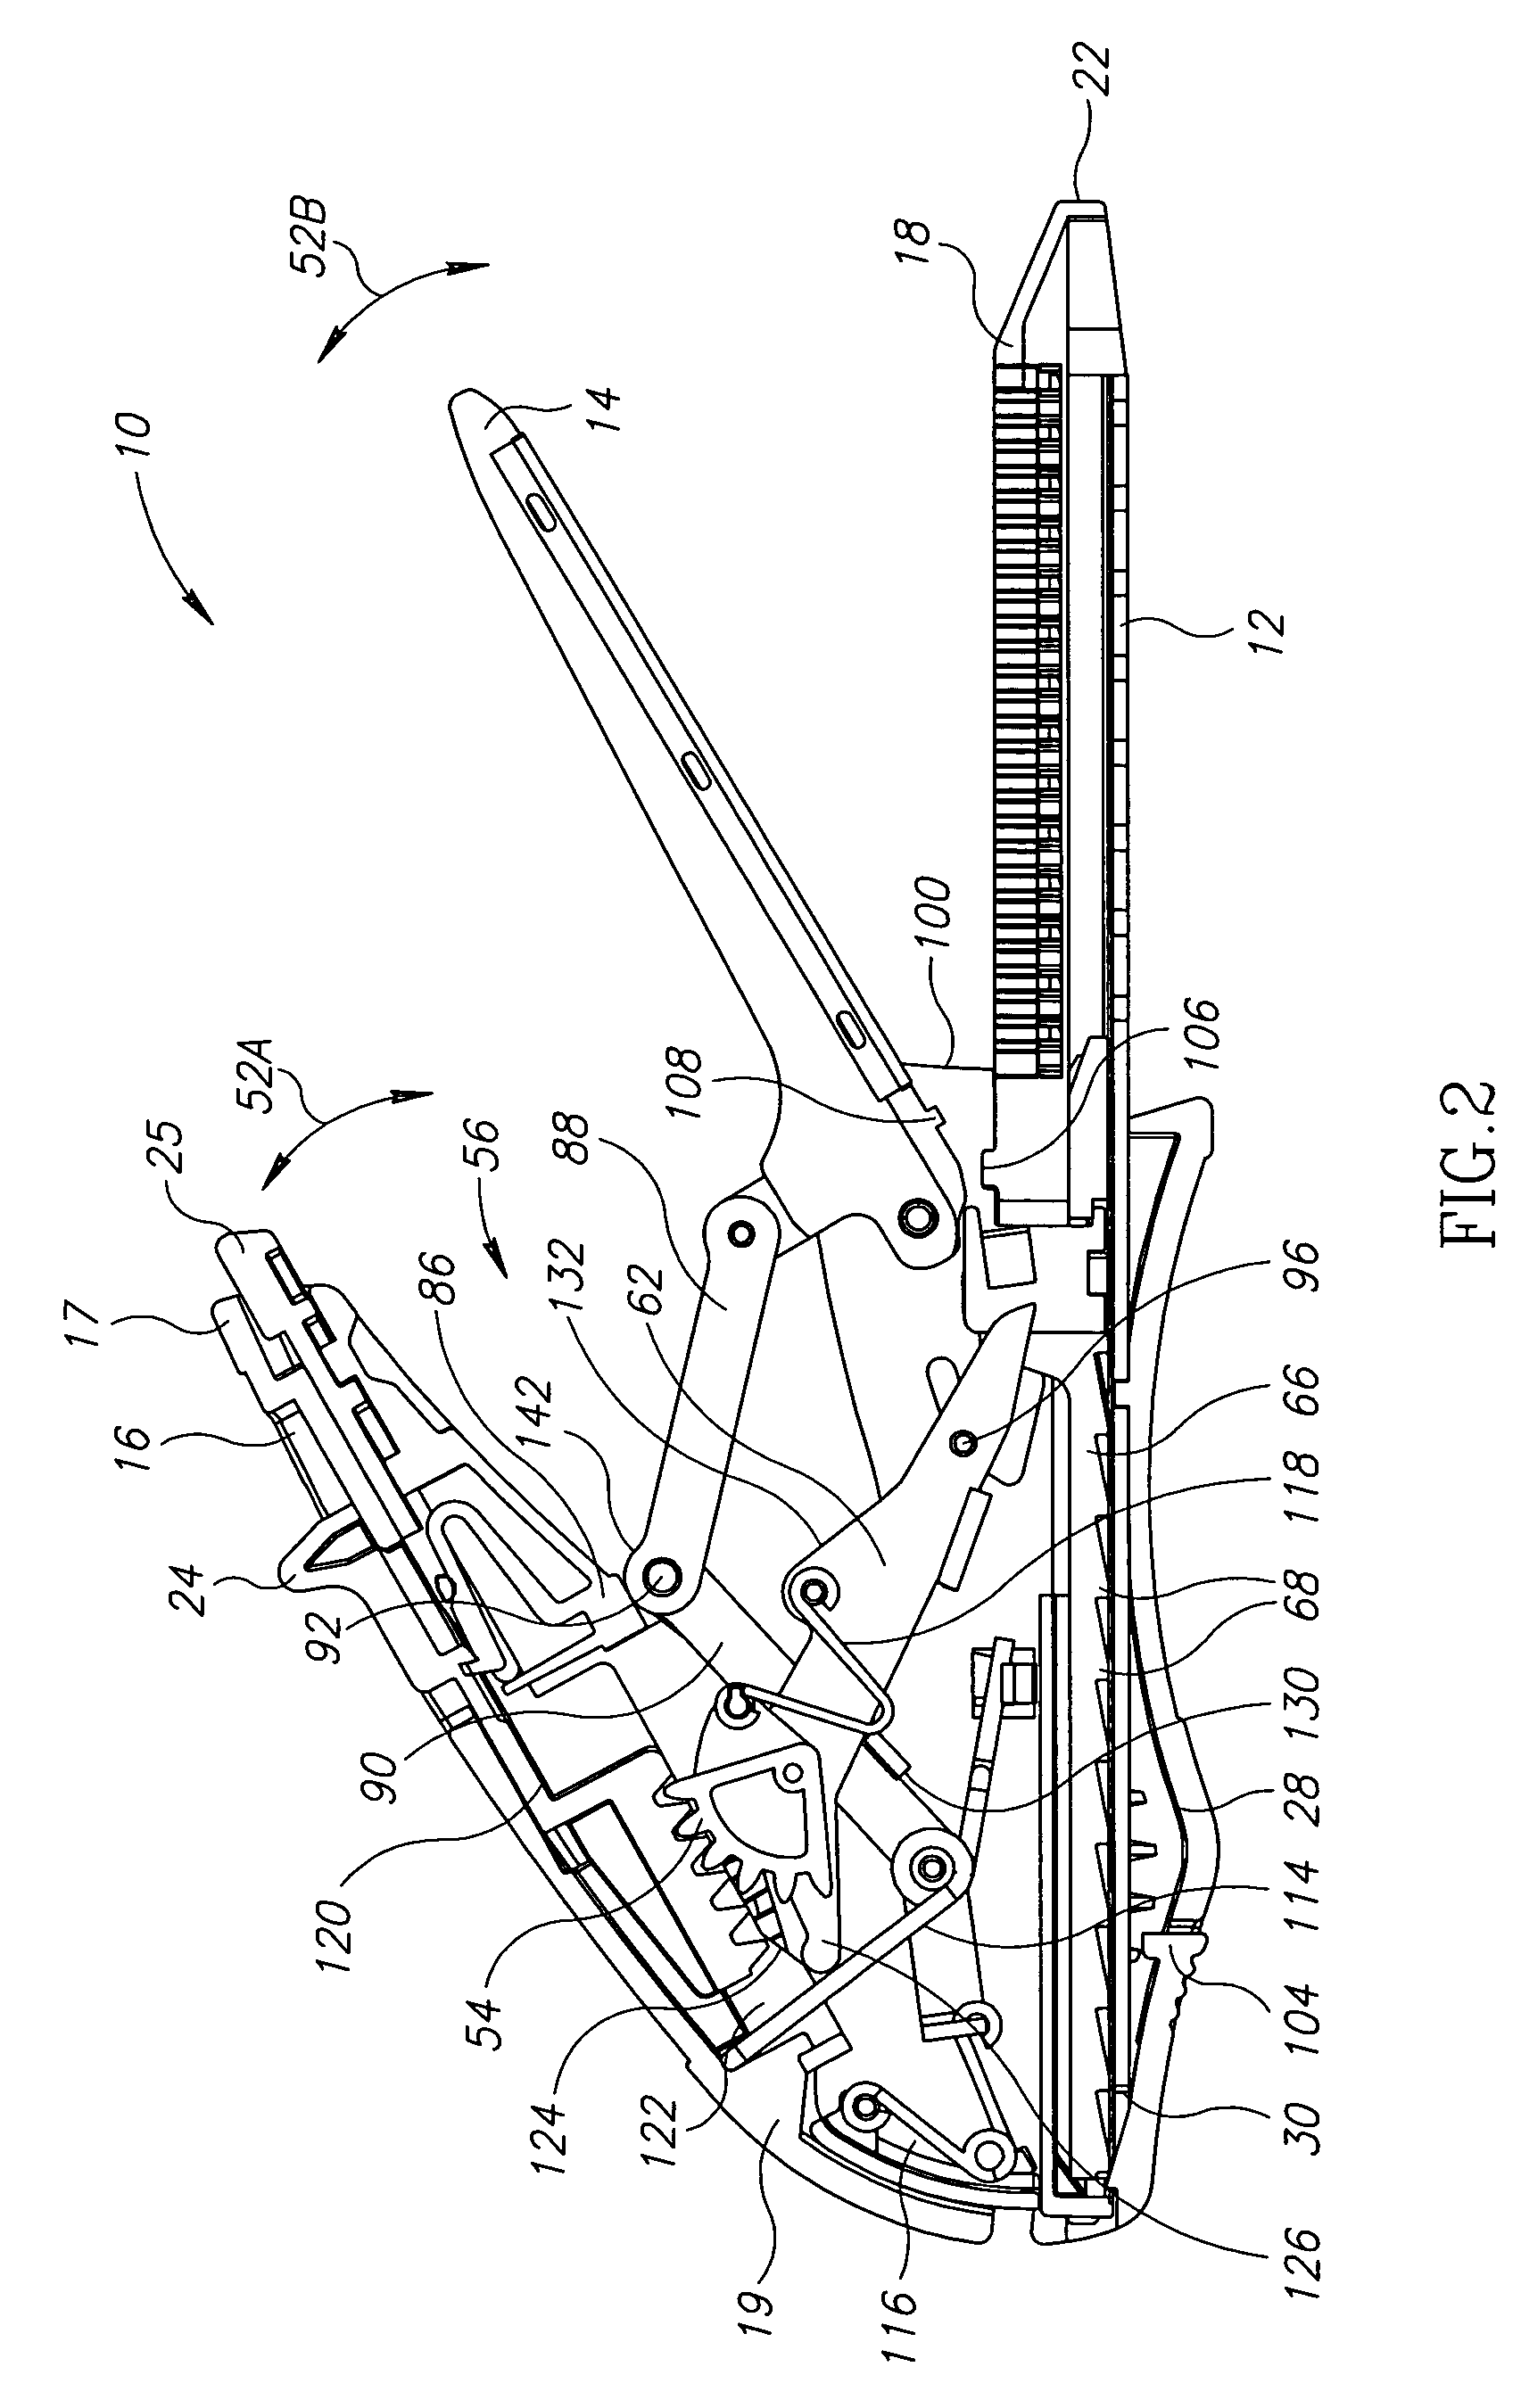 Palm-size surgical stapler for single hand operation